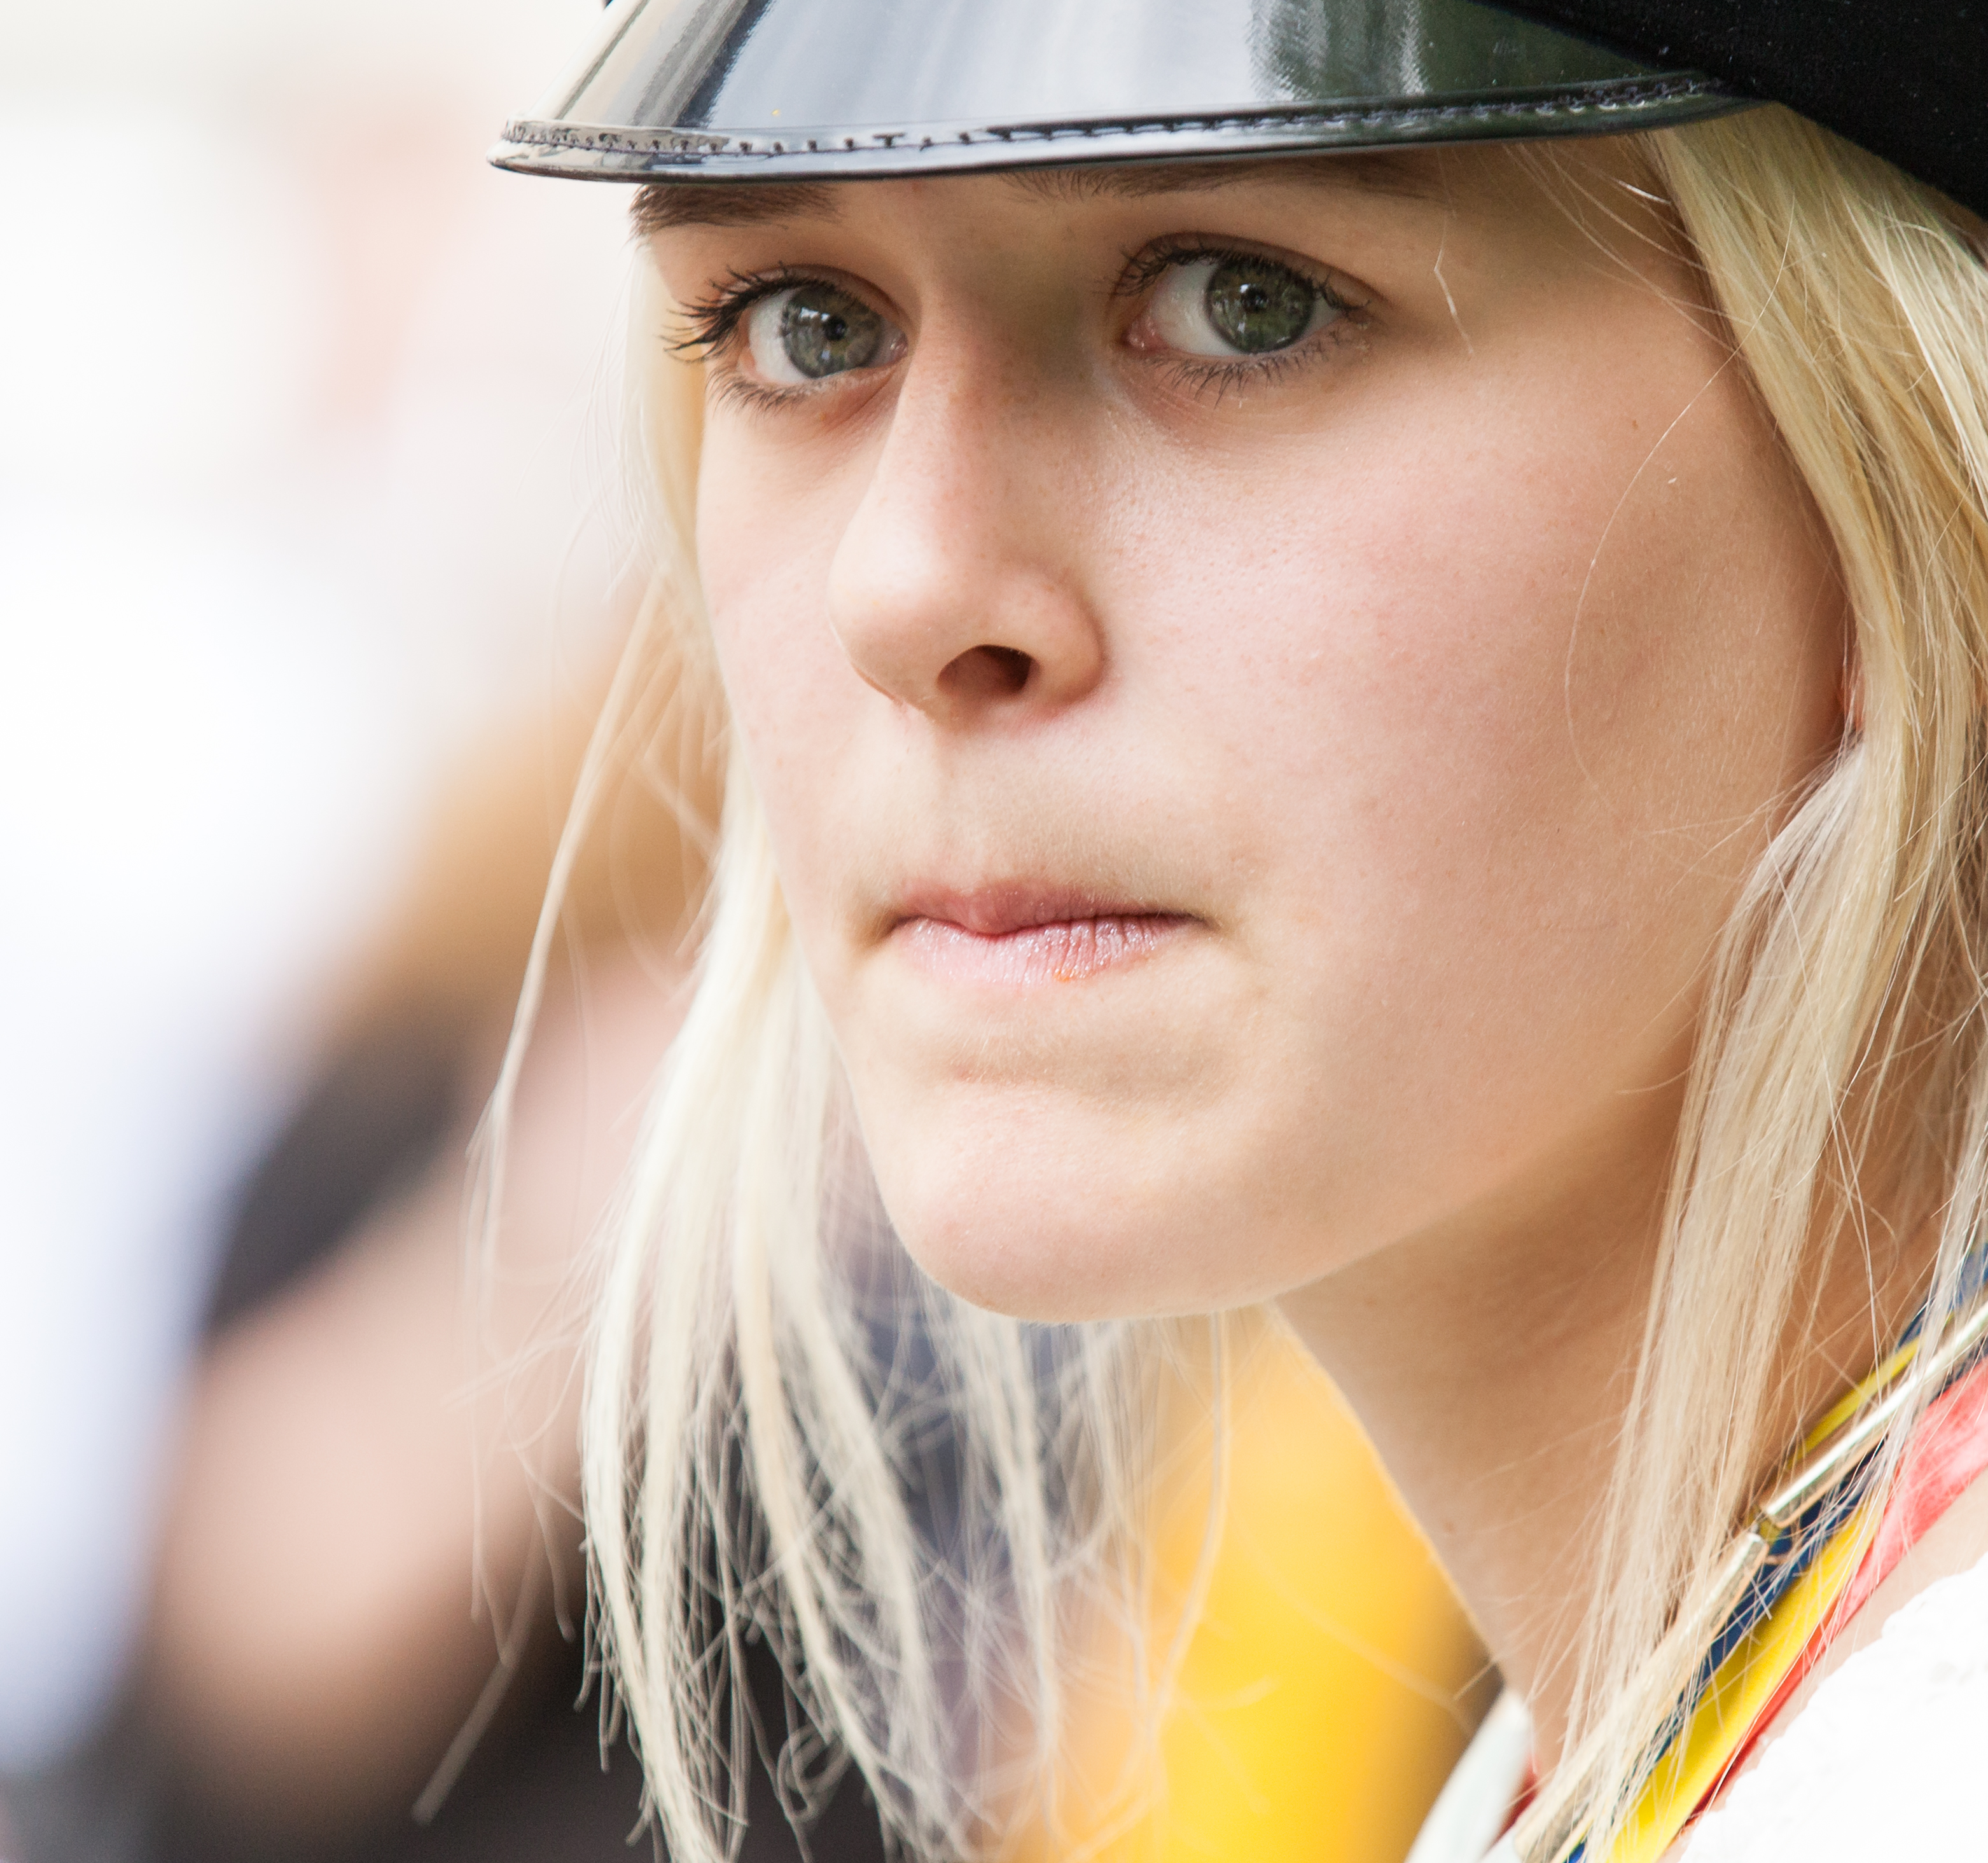 a pretty blond girl photographed in Uppsala, Sweden in June 2014, picture 3/34